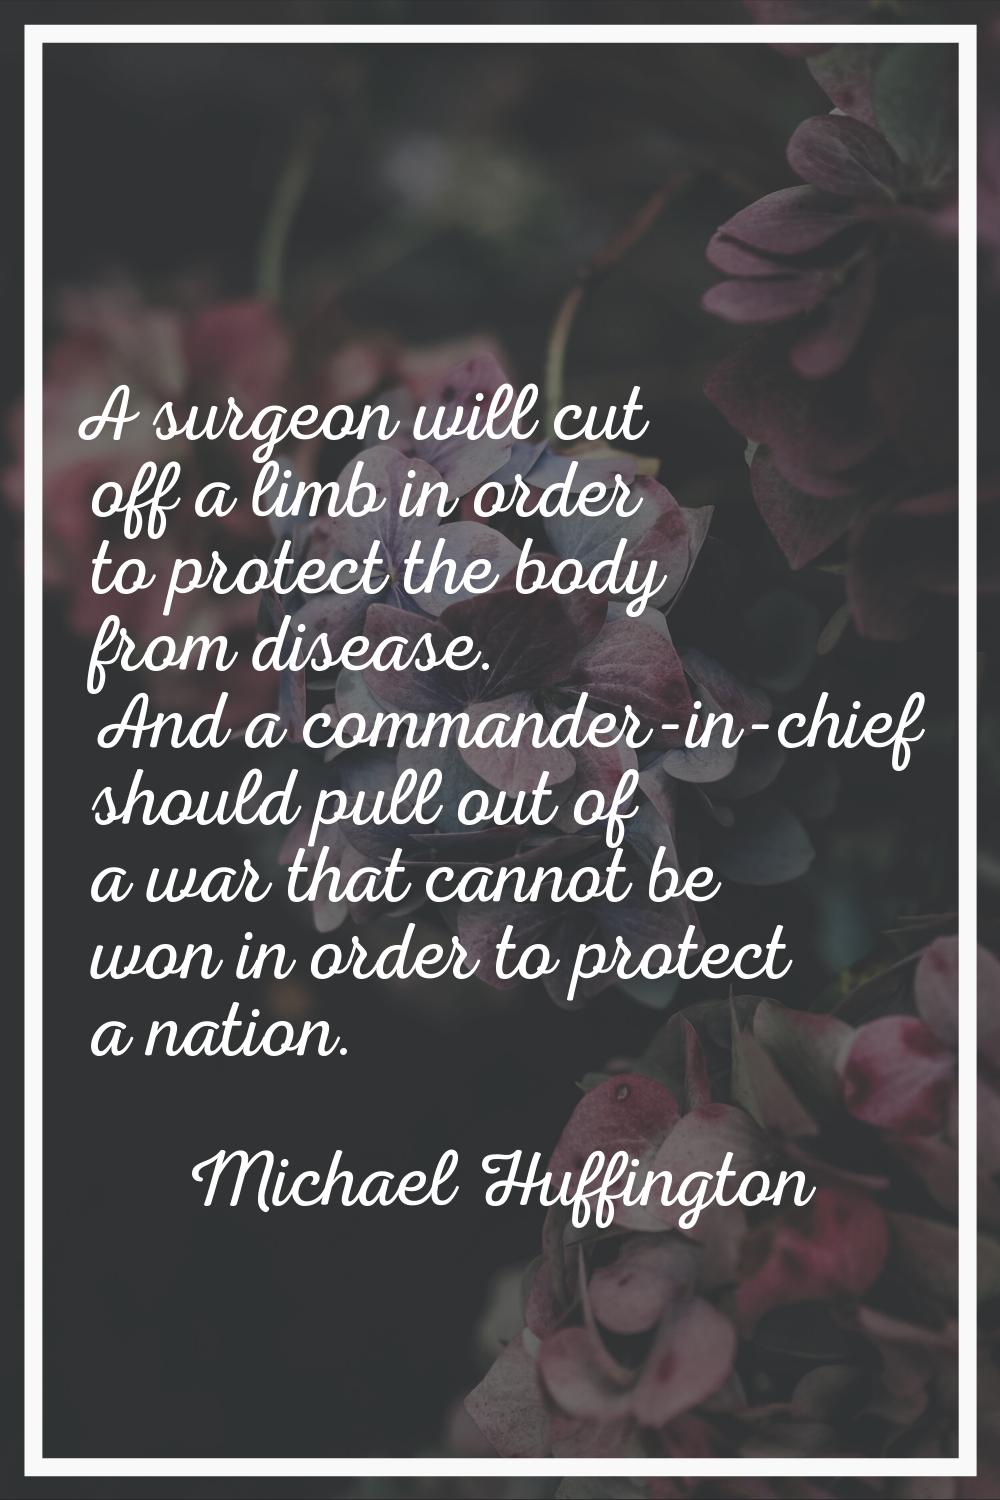 A surgeon will cut off a limb in order to protect the body from disease. And a commander-in-chief s